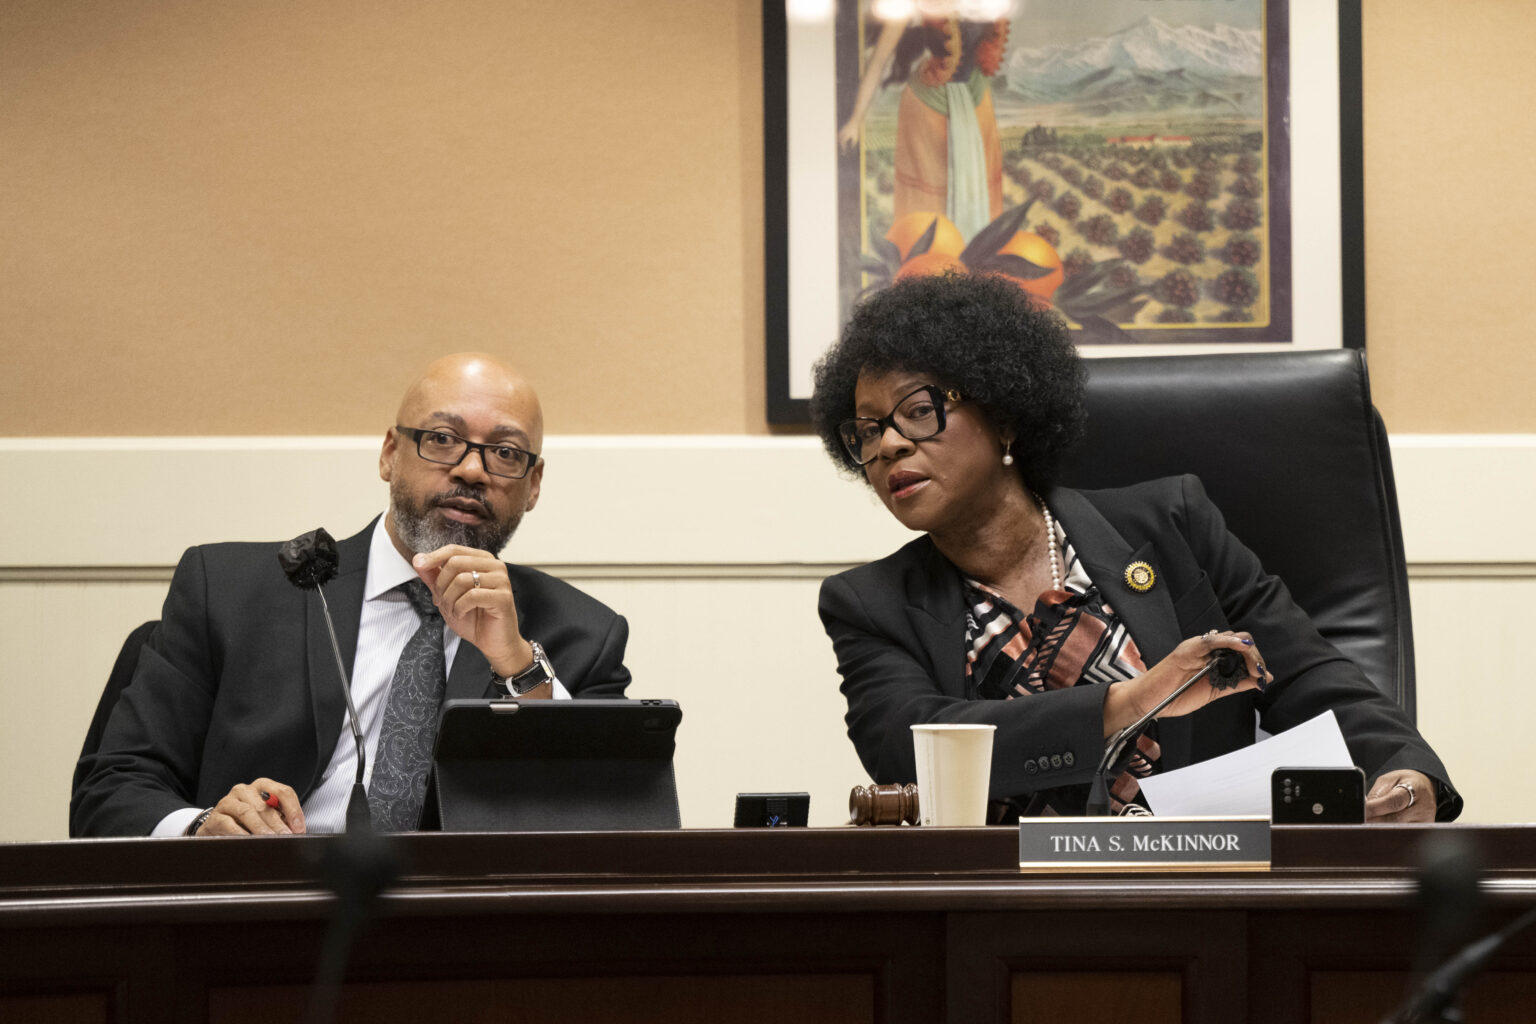 California Assemblymember Tina McKinnor presided over her first hearing as chair of the Public Employees' Retirement System committee on March 22, 2023.